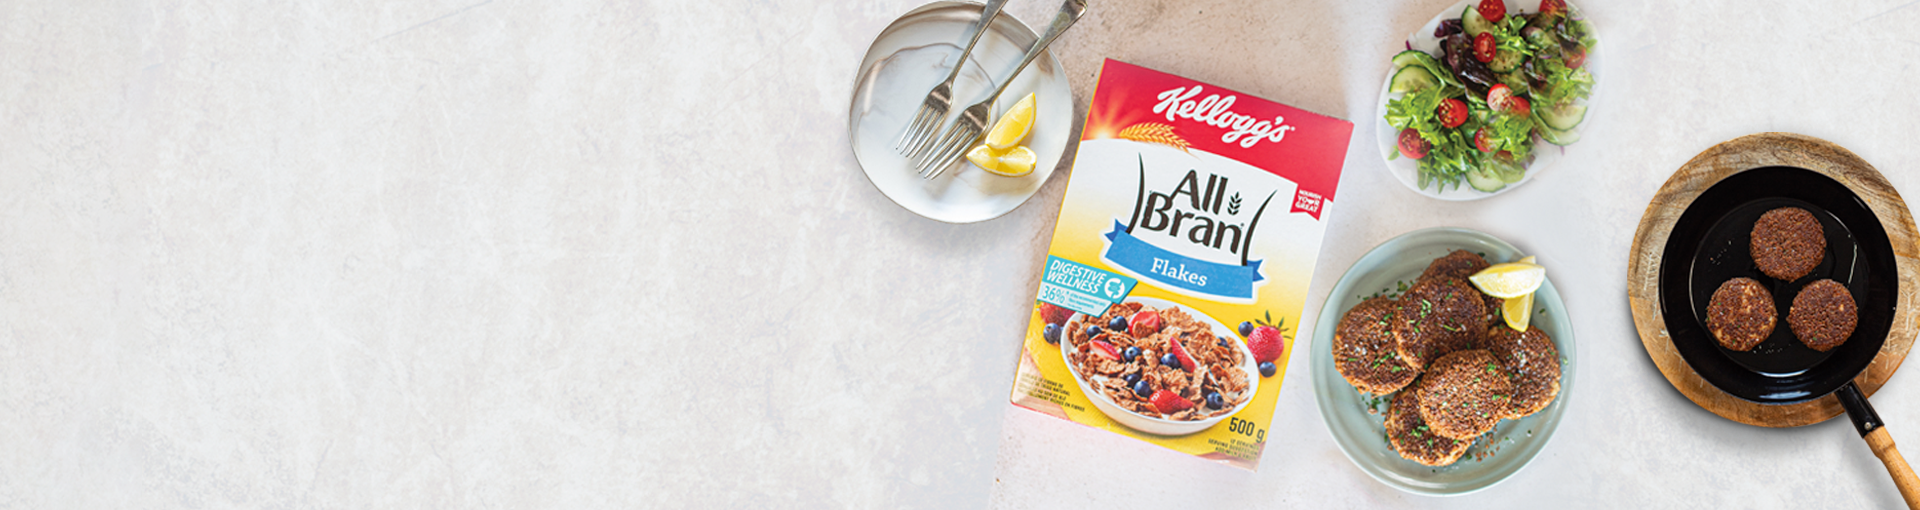 All-Bran Fish Cakes by Kellogg’s